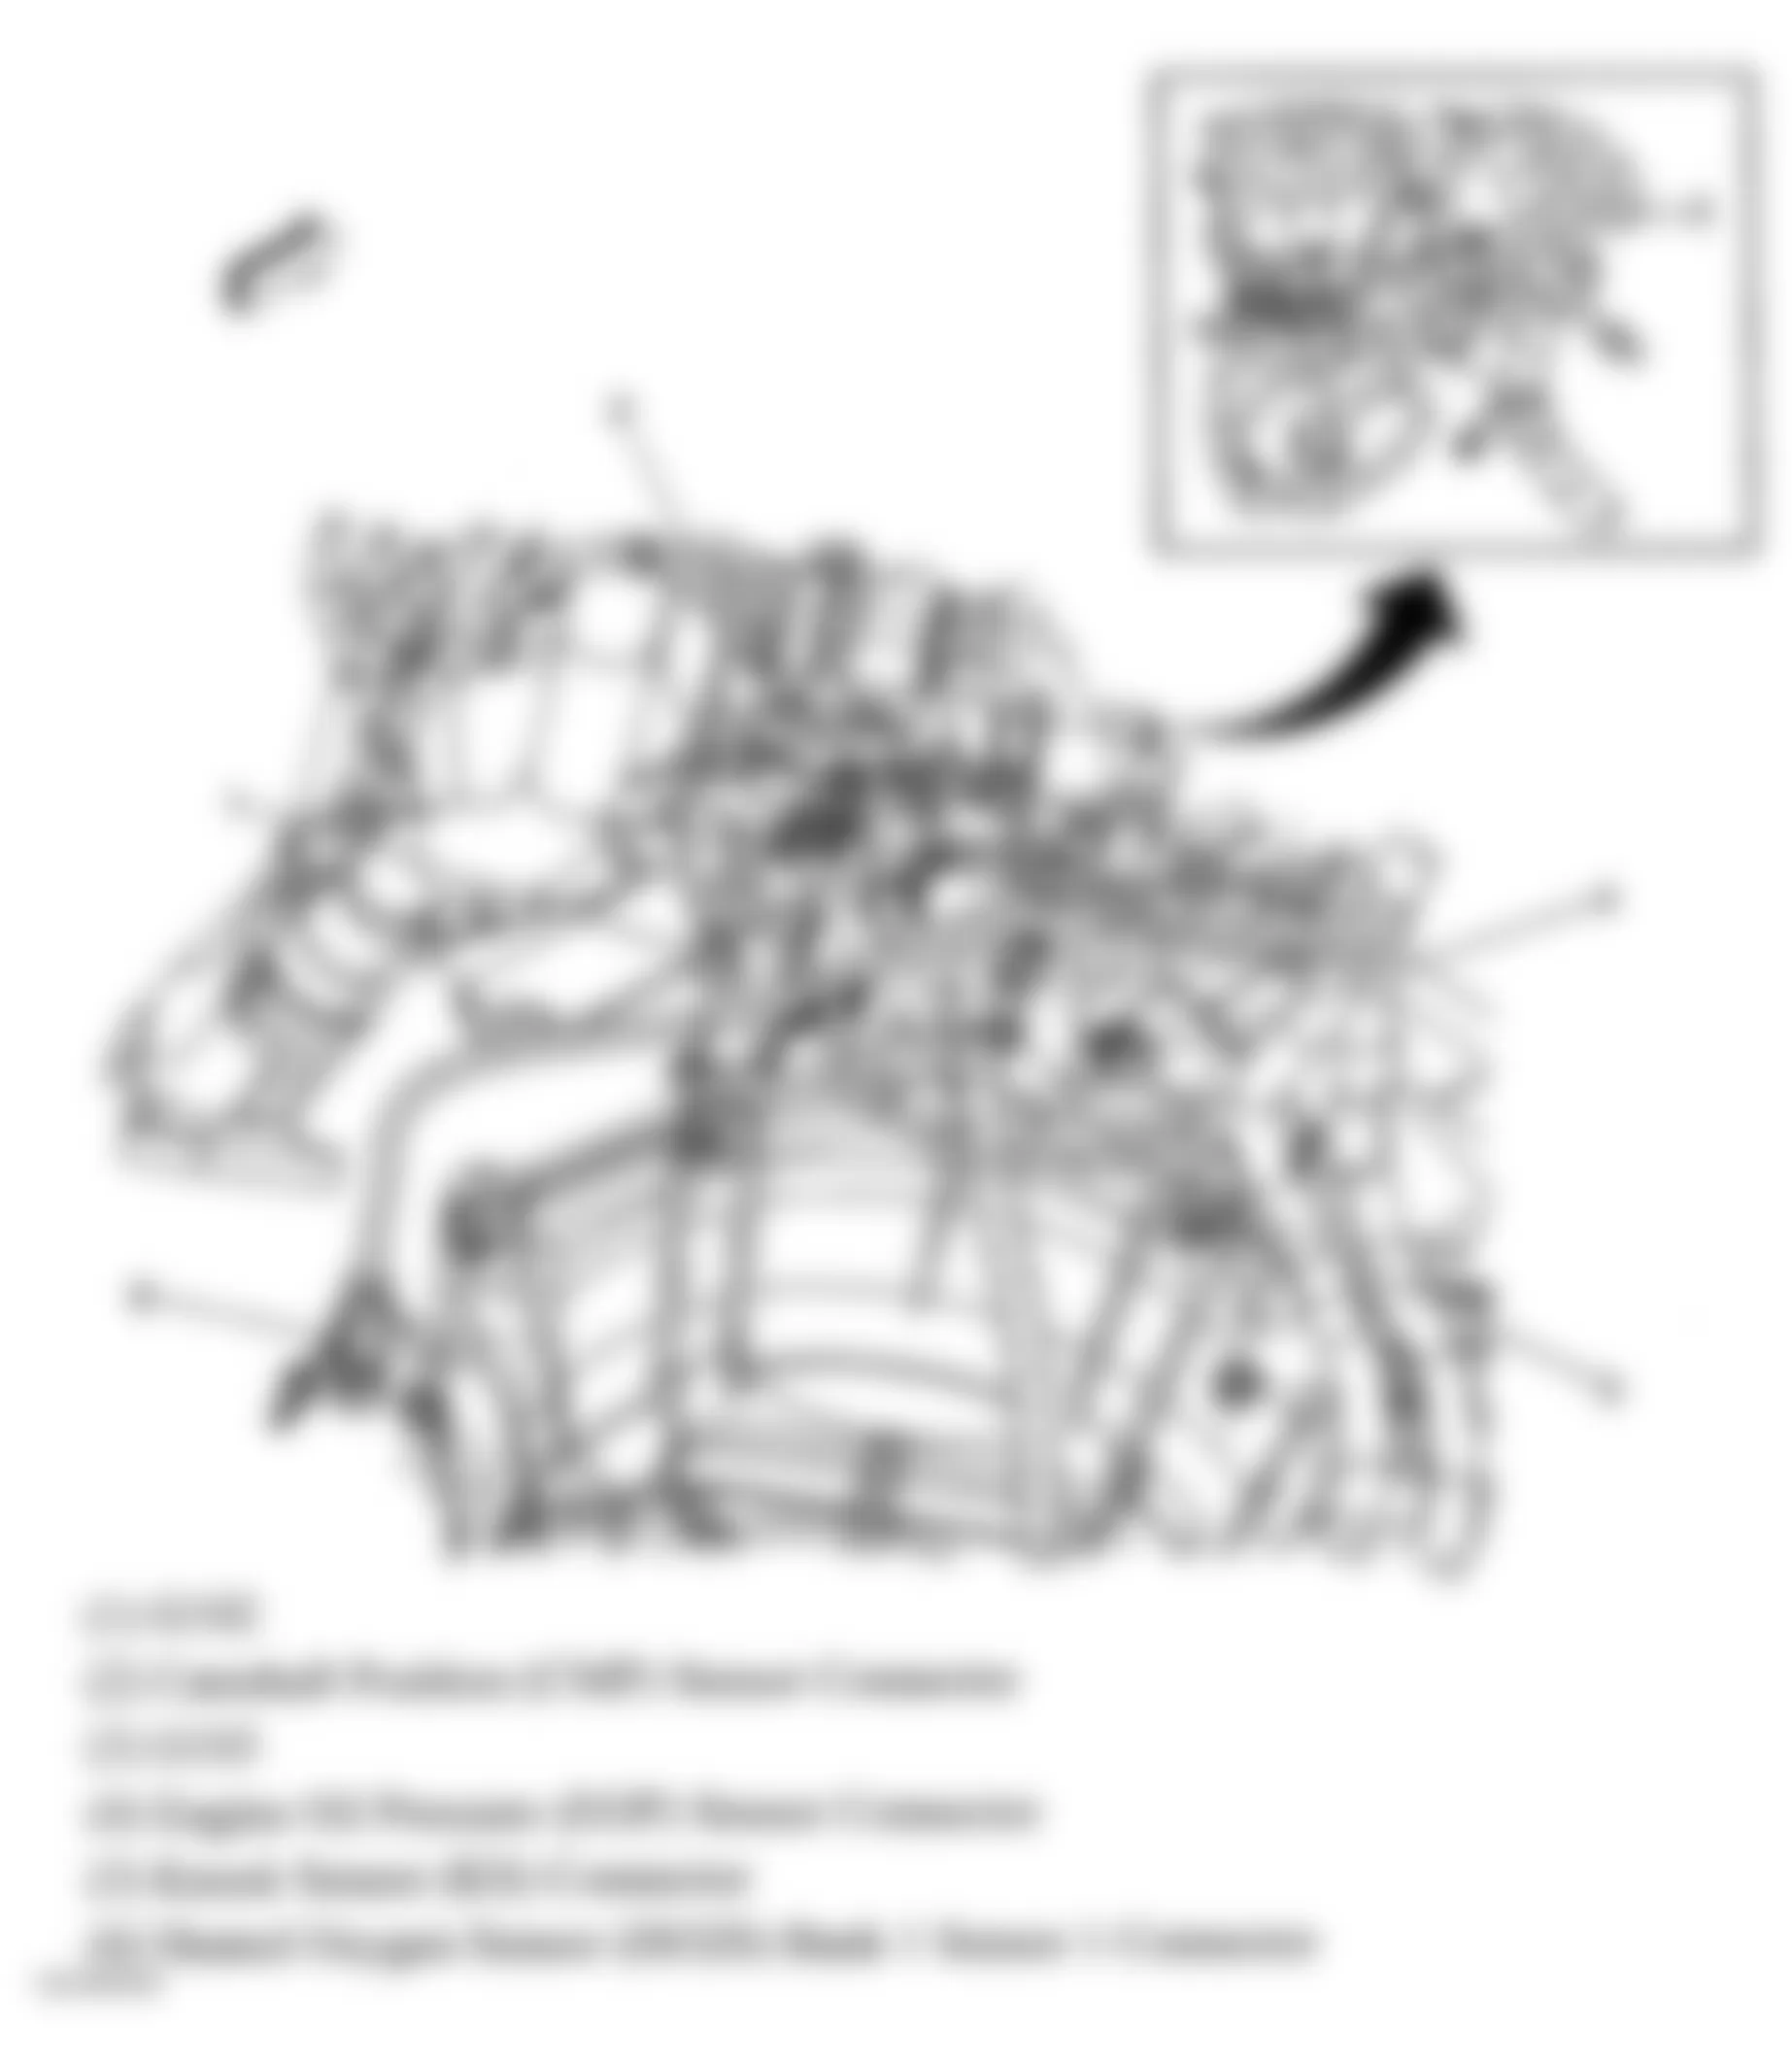 GMC Savana Special G3500 2005 - Component Locations -  Rear Of Engine (4.3L VIN X)